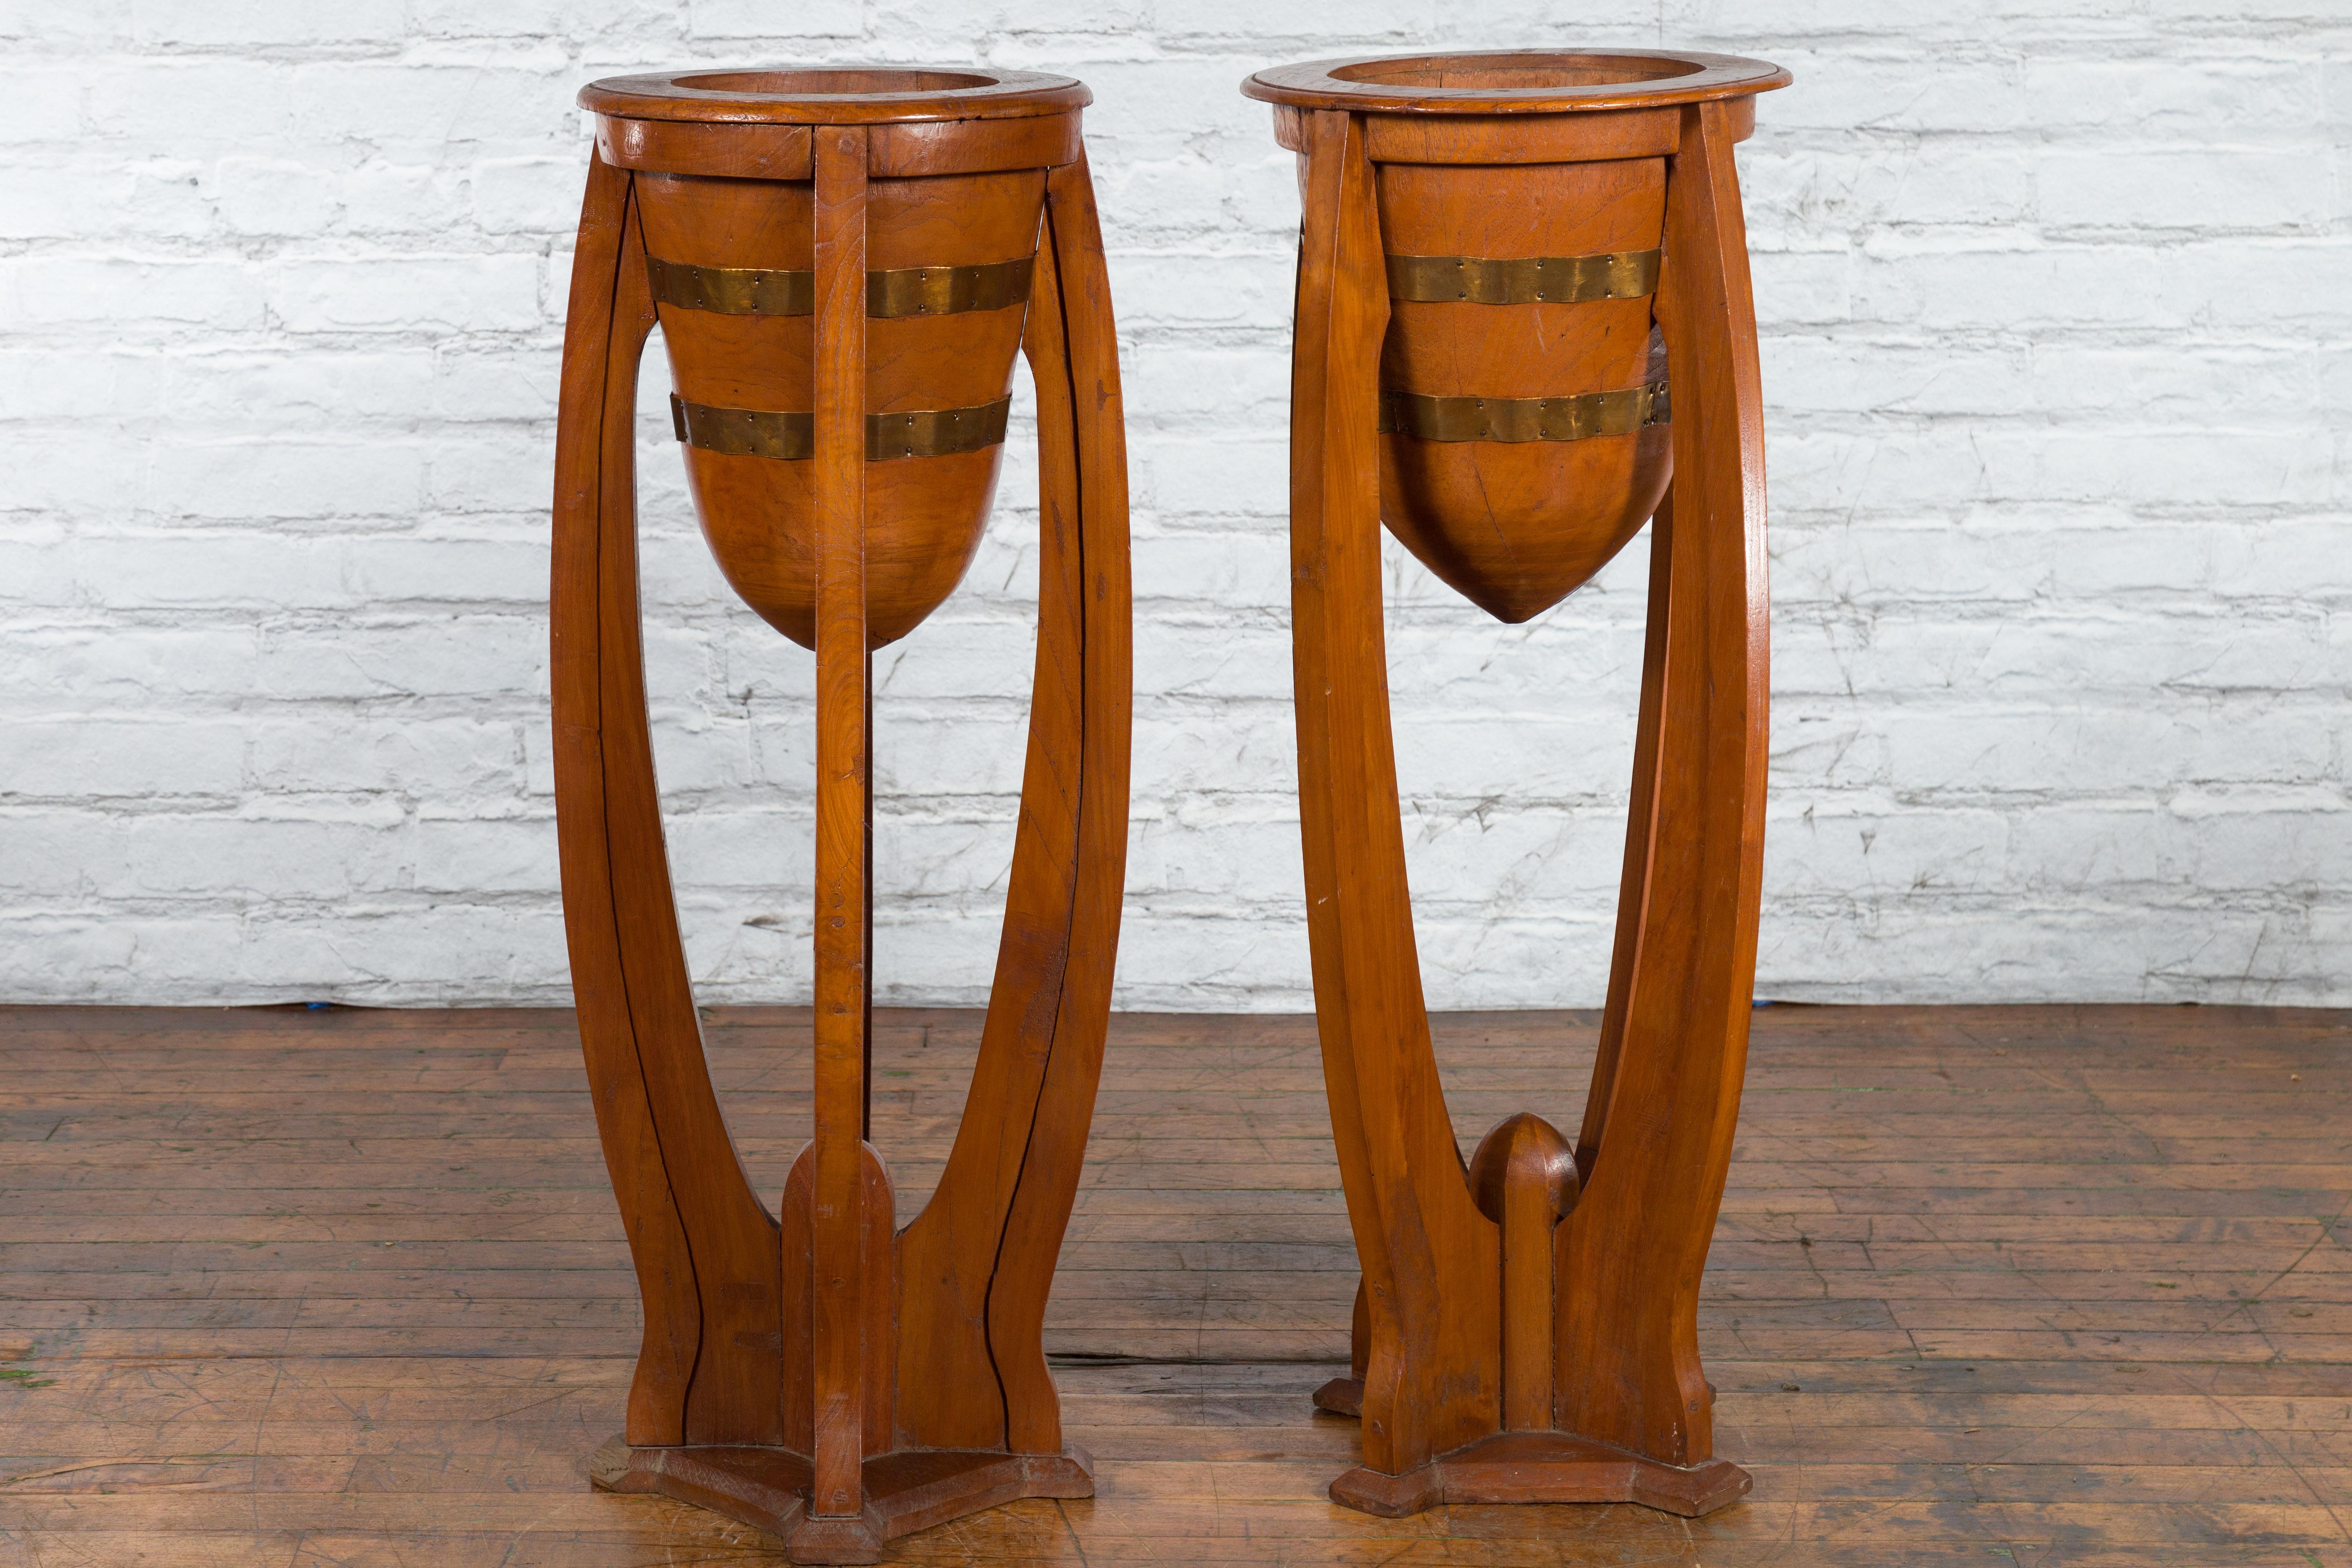 Large Pair of Javanese Art Deco Style Teak Wood Plant Stands with Brass Braces For Sale 6